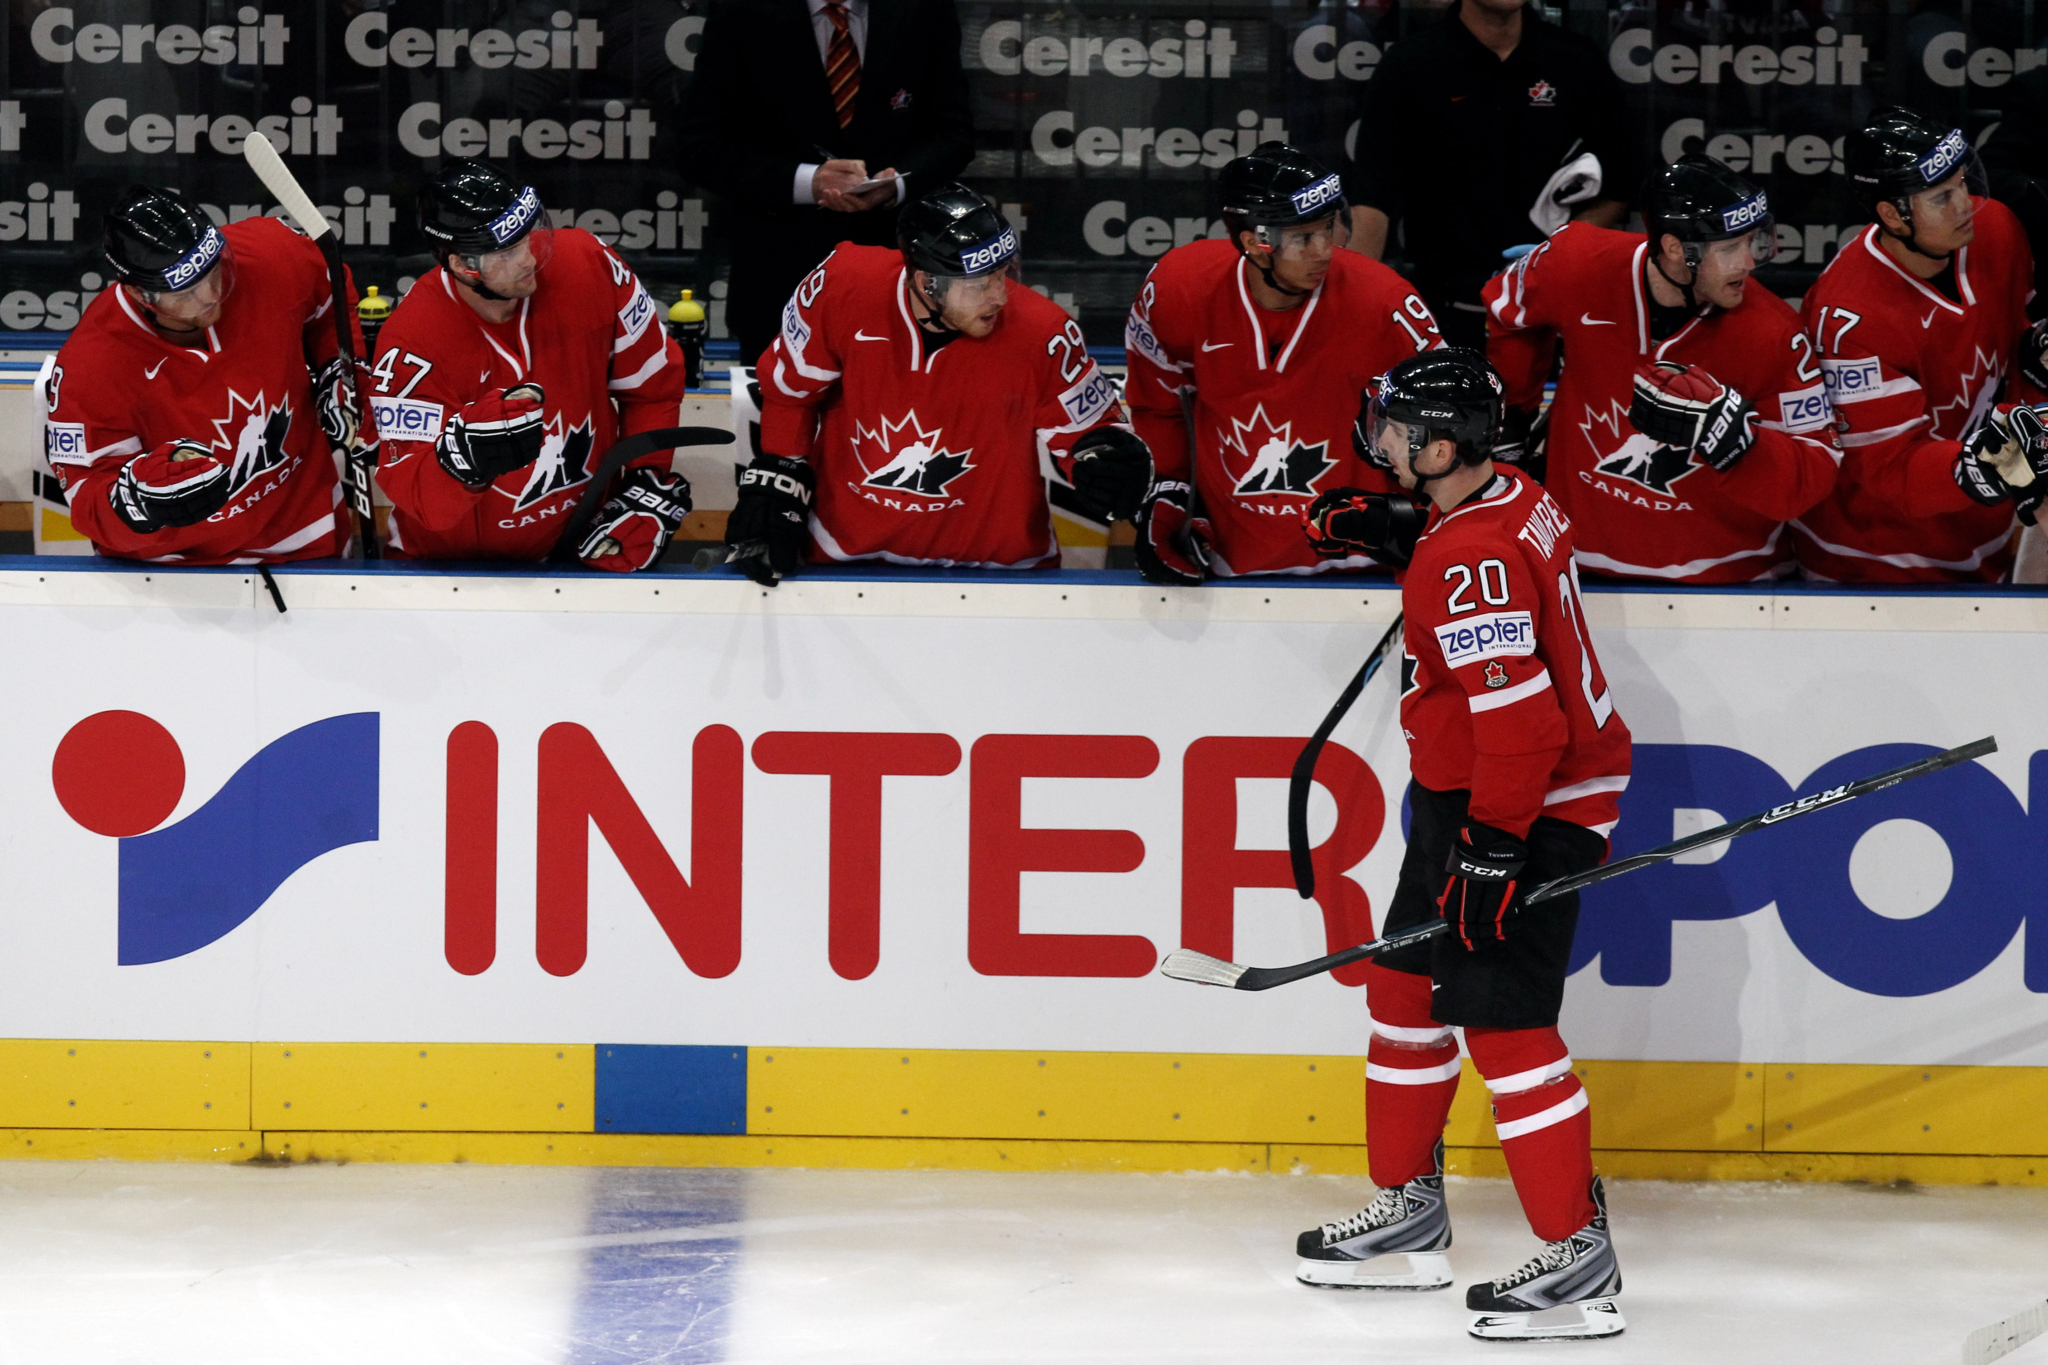 Mark Stone Leads Team Canada into TSNs Exclusive Live Coverage of the 2019 IIHF WORLD CHAMPIONSHIP, Beginning May 10